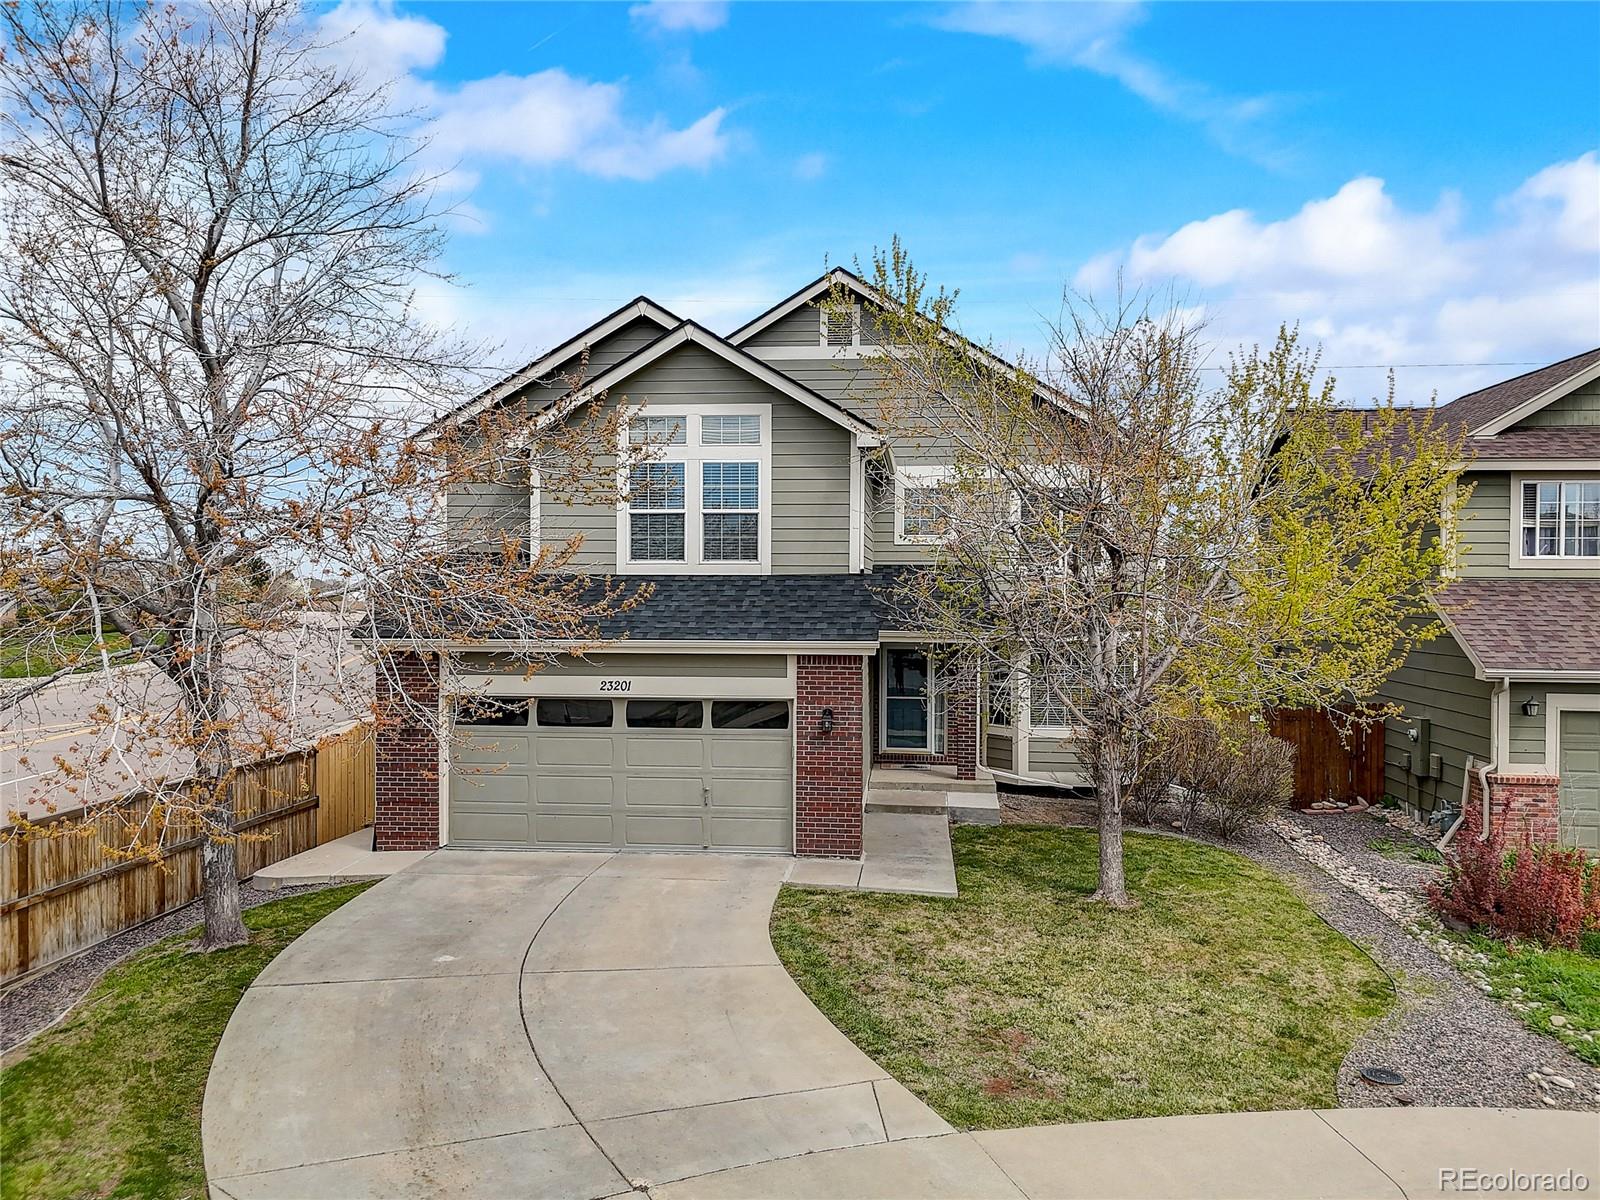 23201 E Orchard Place, aurora MLS: 5242131 Beds: 4 Baths: 3 Price: $630,000